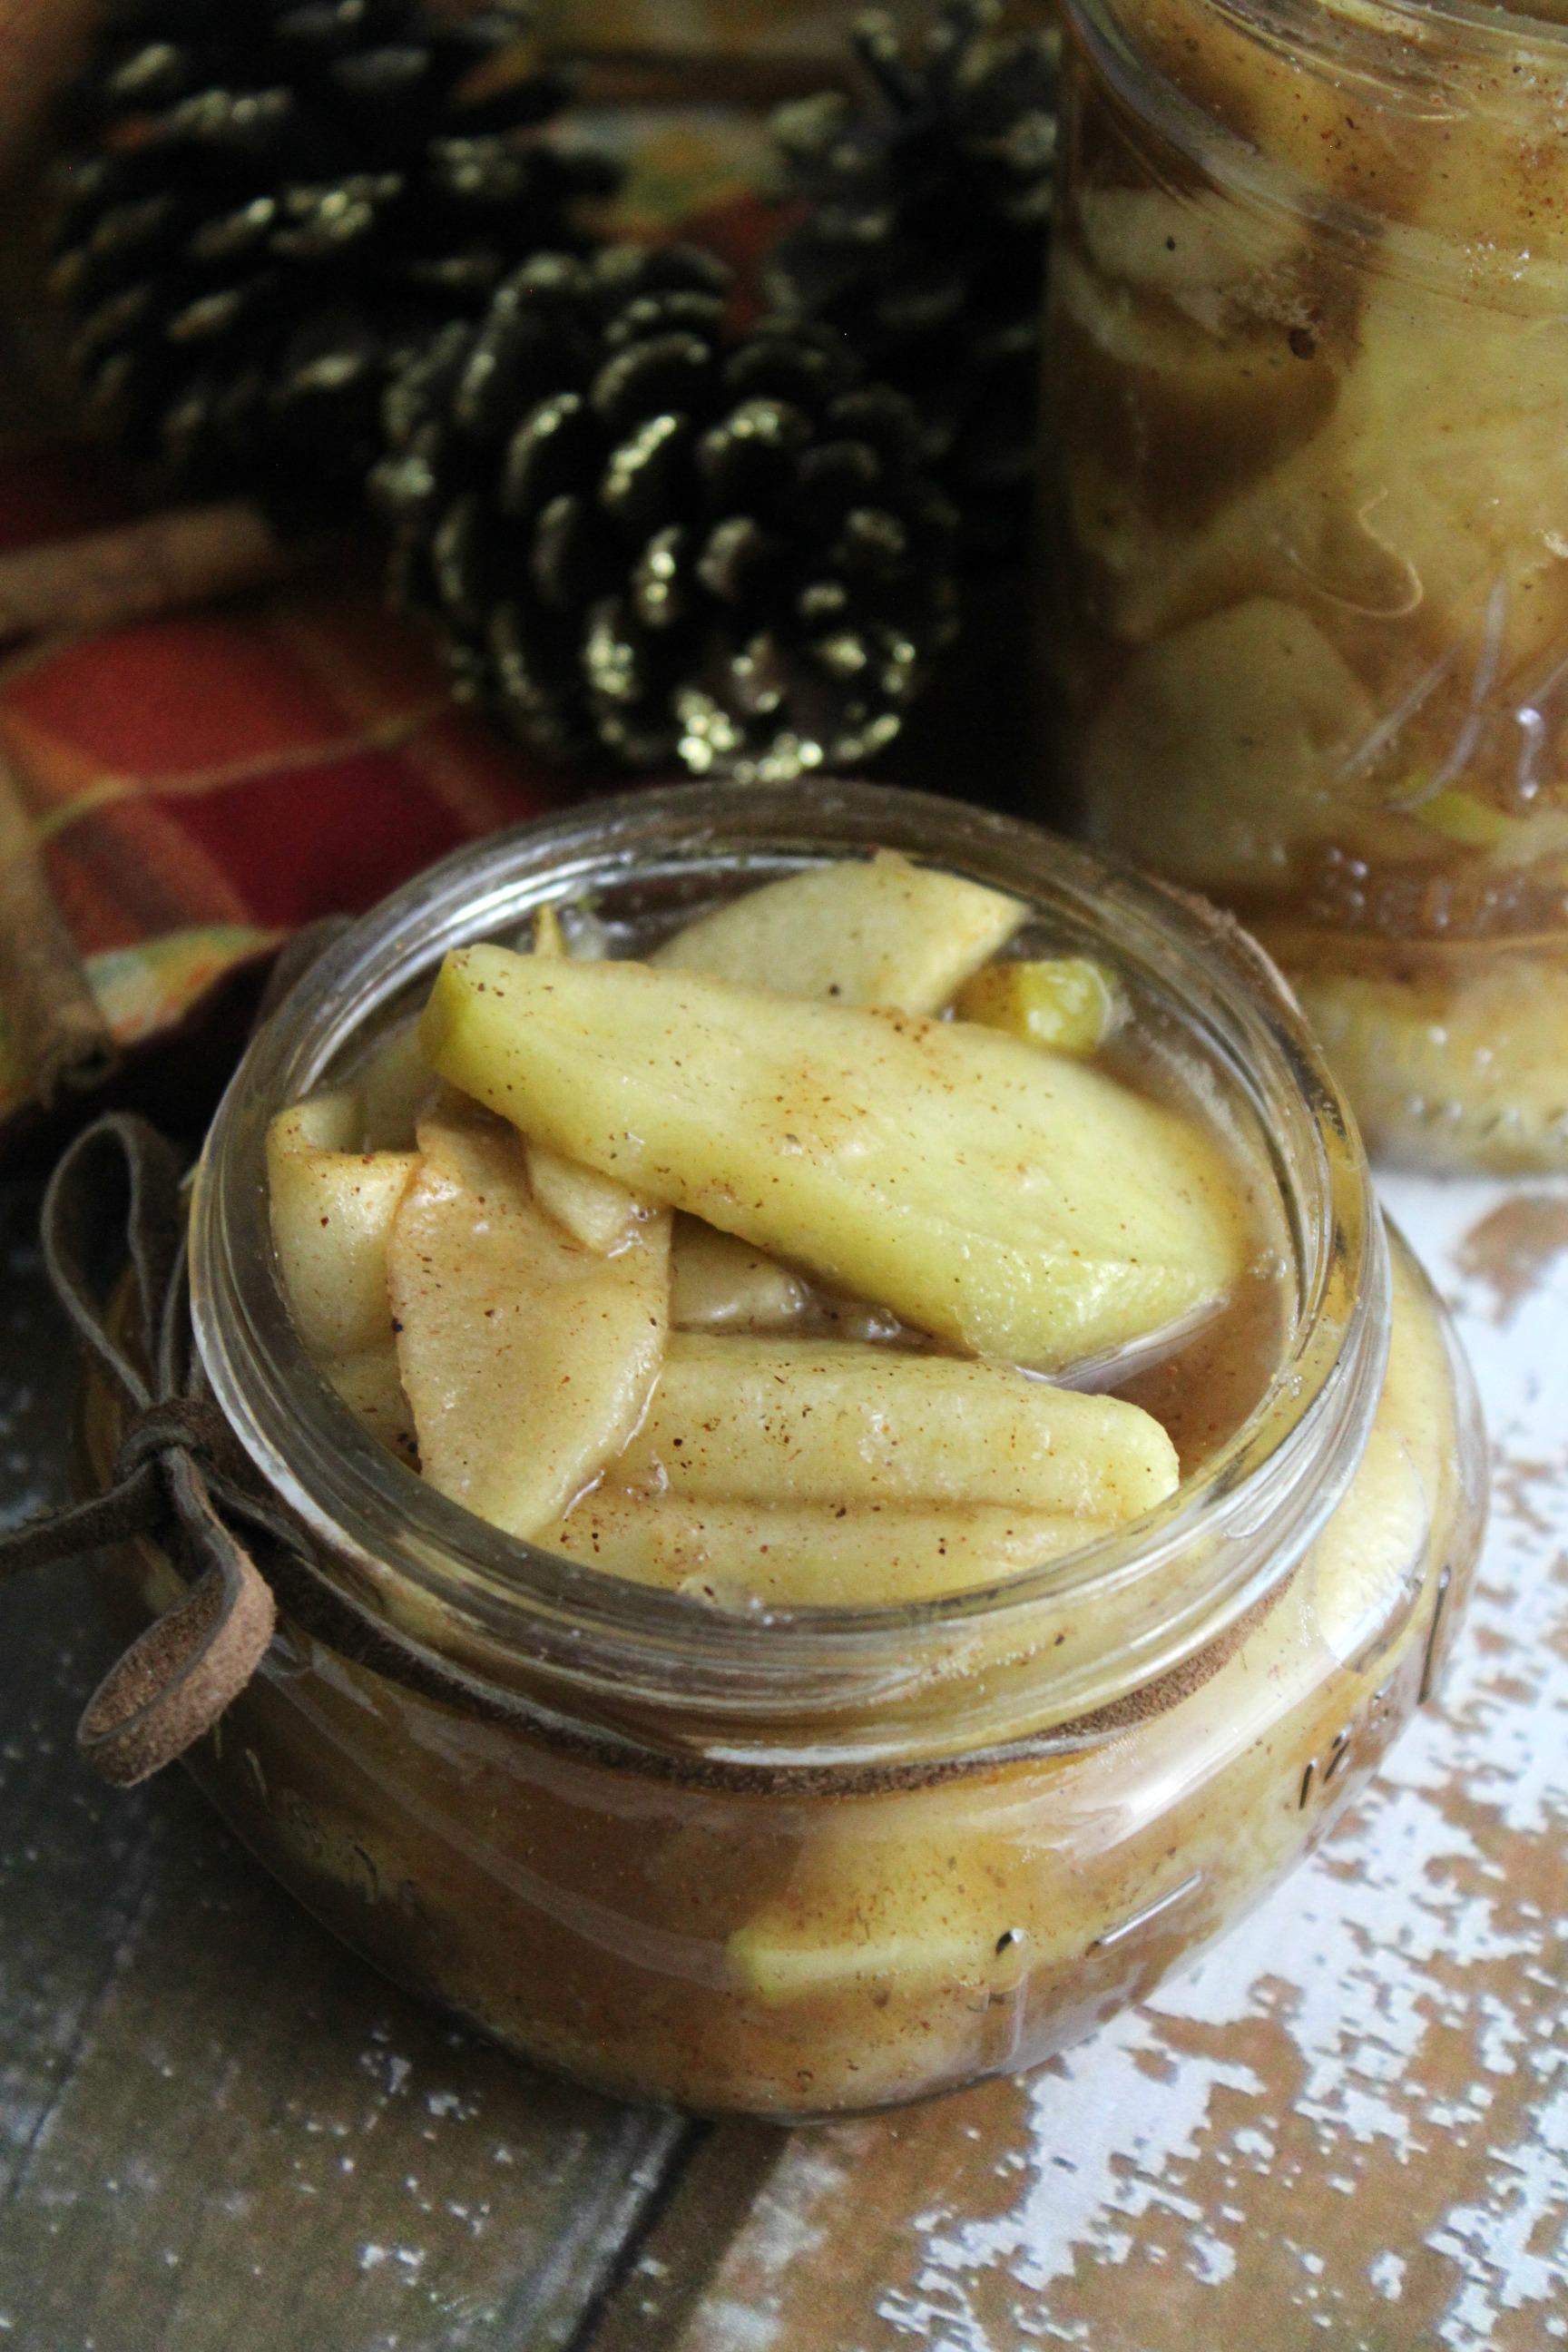 A deliciously easy recipe for homemade apple pie filling that doesn't rely on refined sugar! This filling is grain-free and comes together quickly!